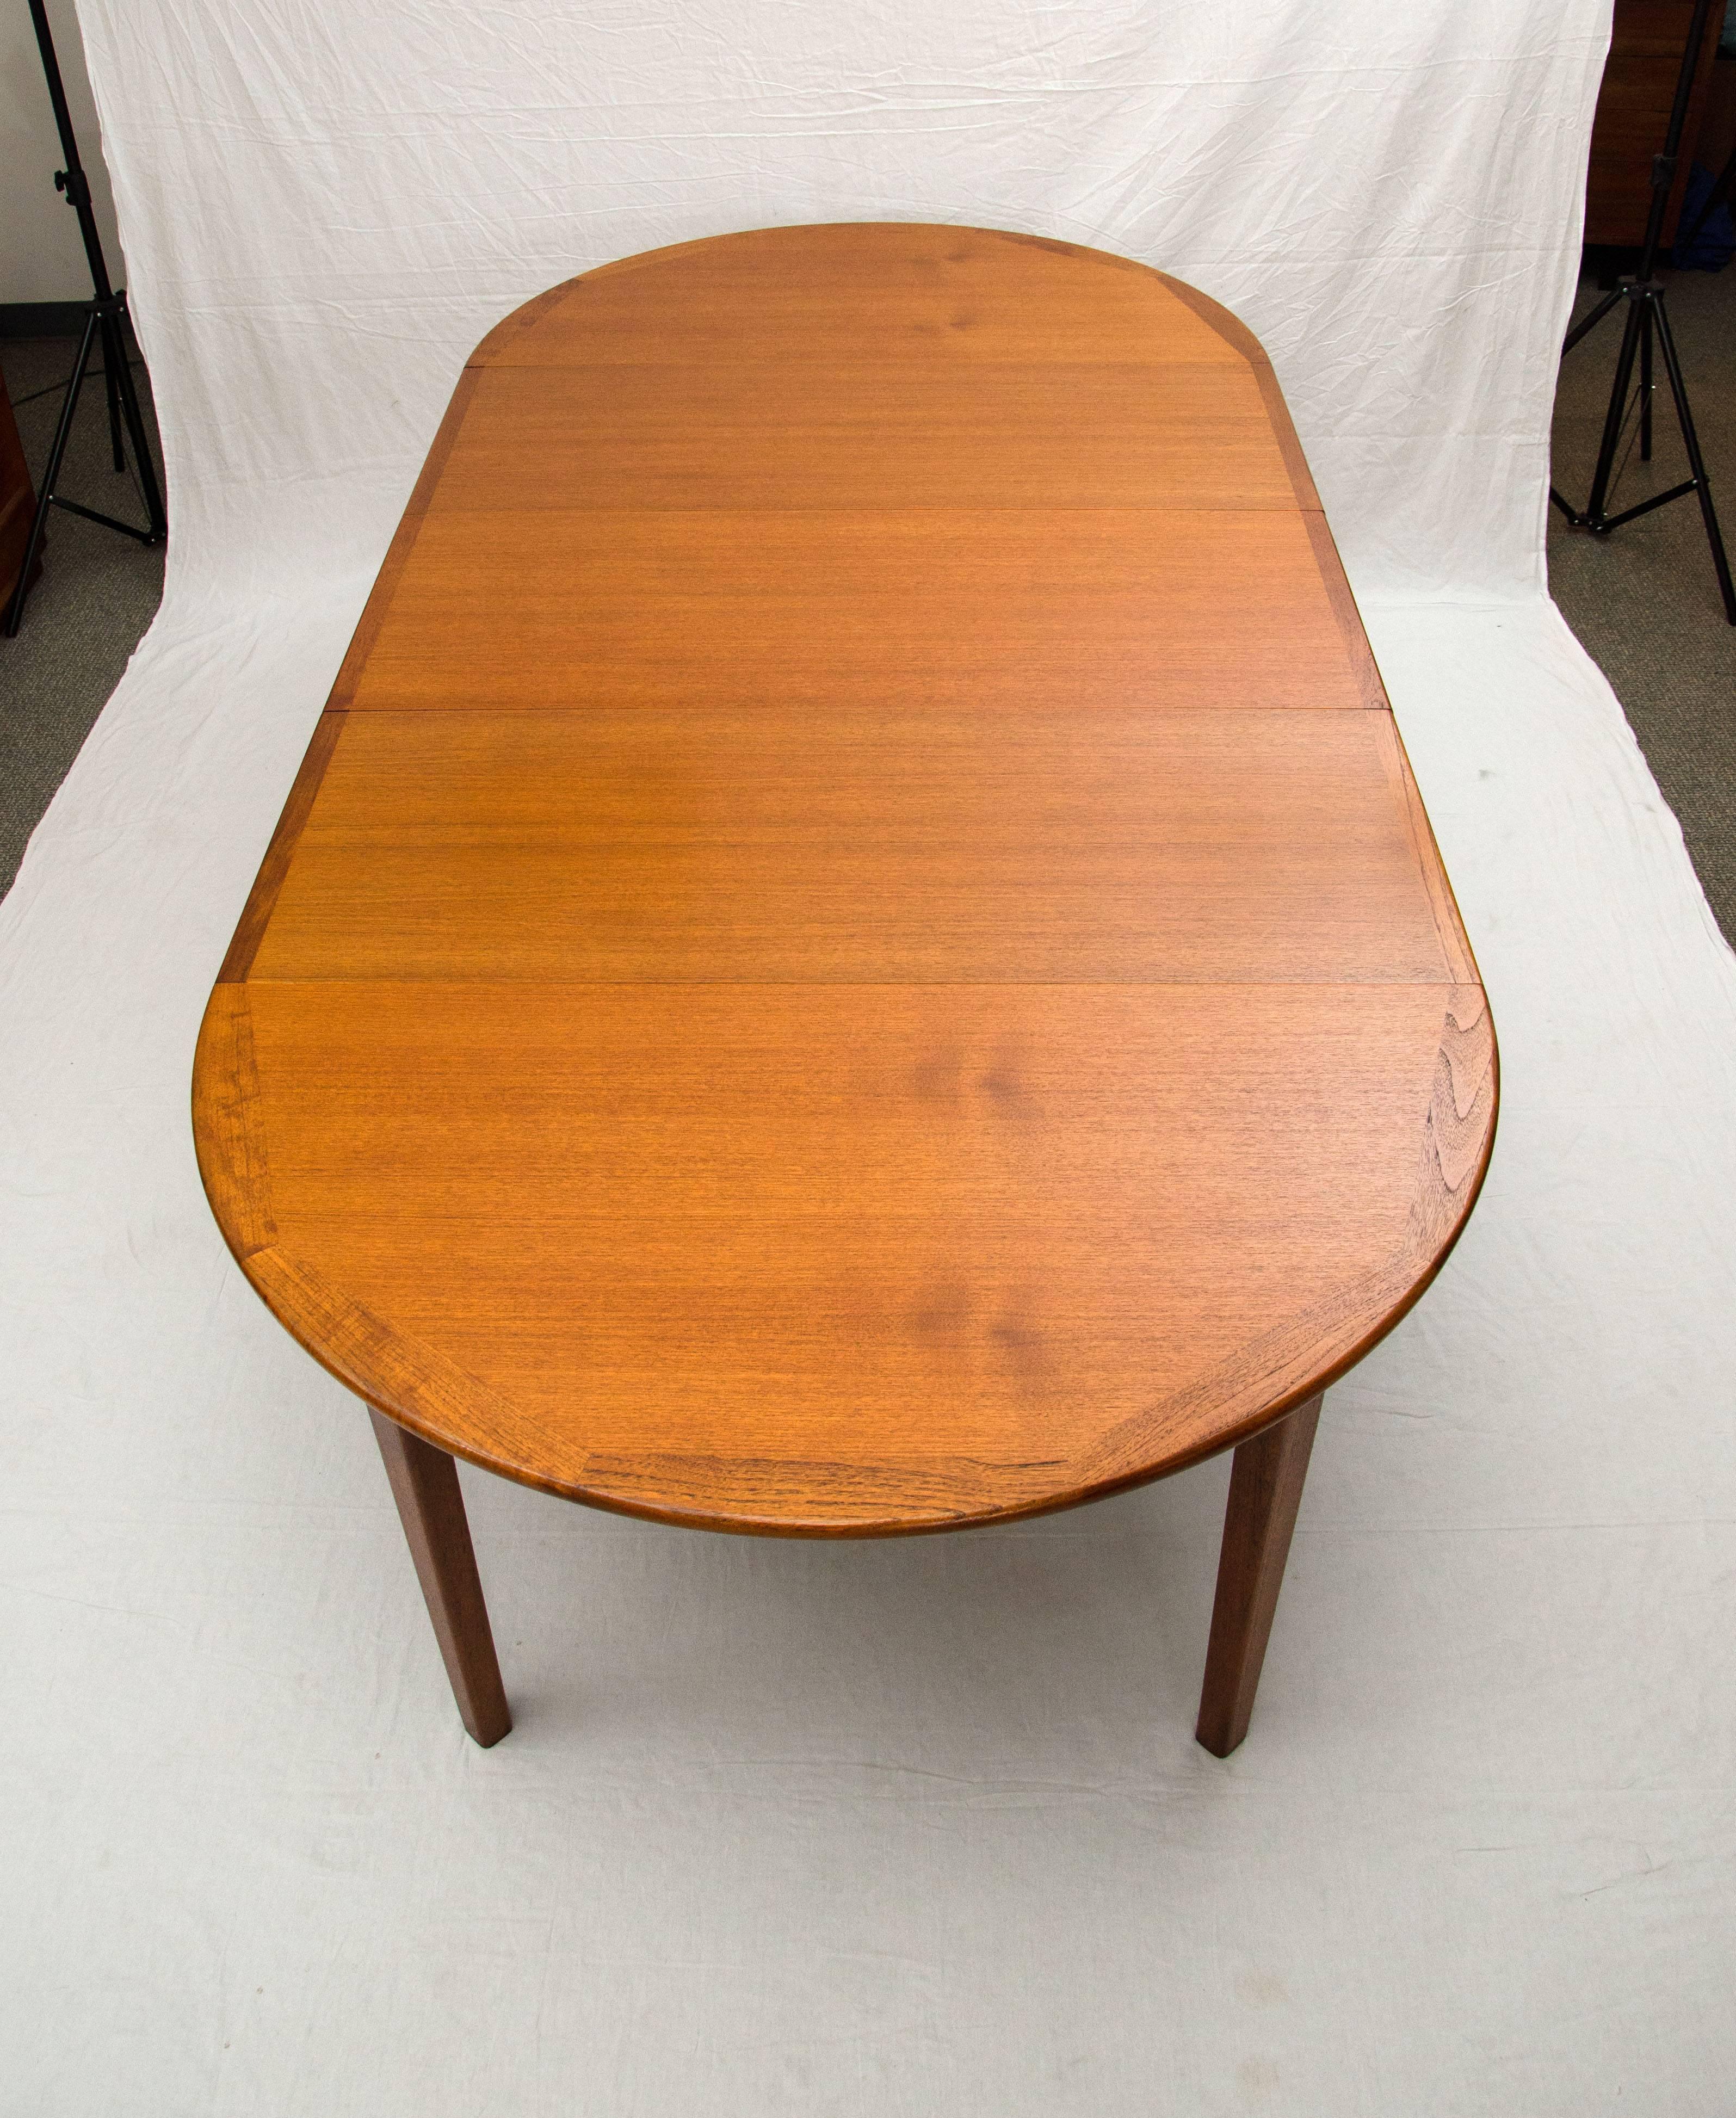 Very nice circular table with accented edges. It features square tapered legs and has aprons on all the leaves so there are no gaps when the leaves are in use. Seating for four without the leaves in use, seating for six with one or two 19 5/8"